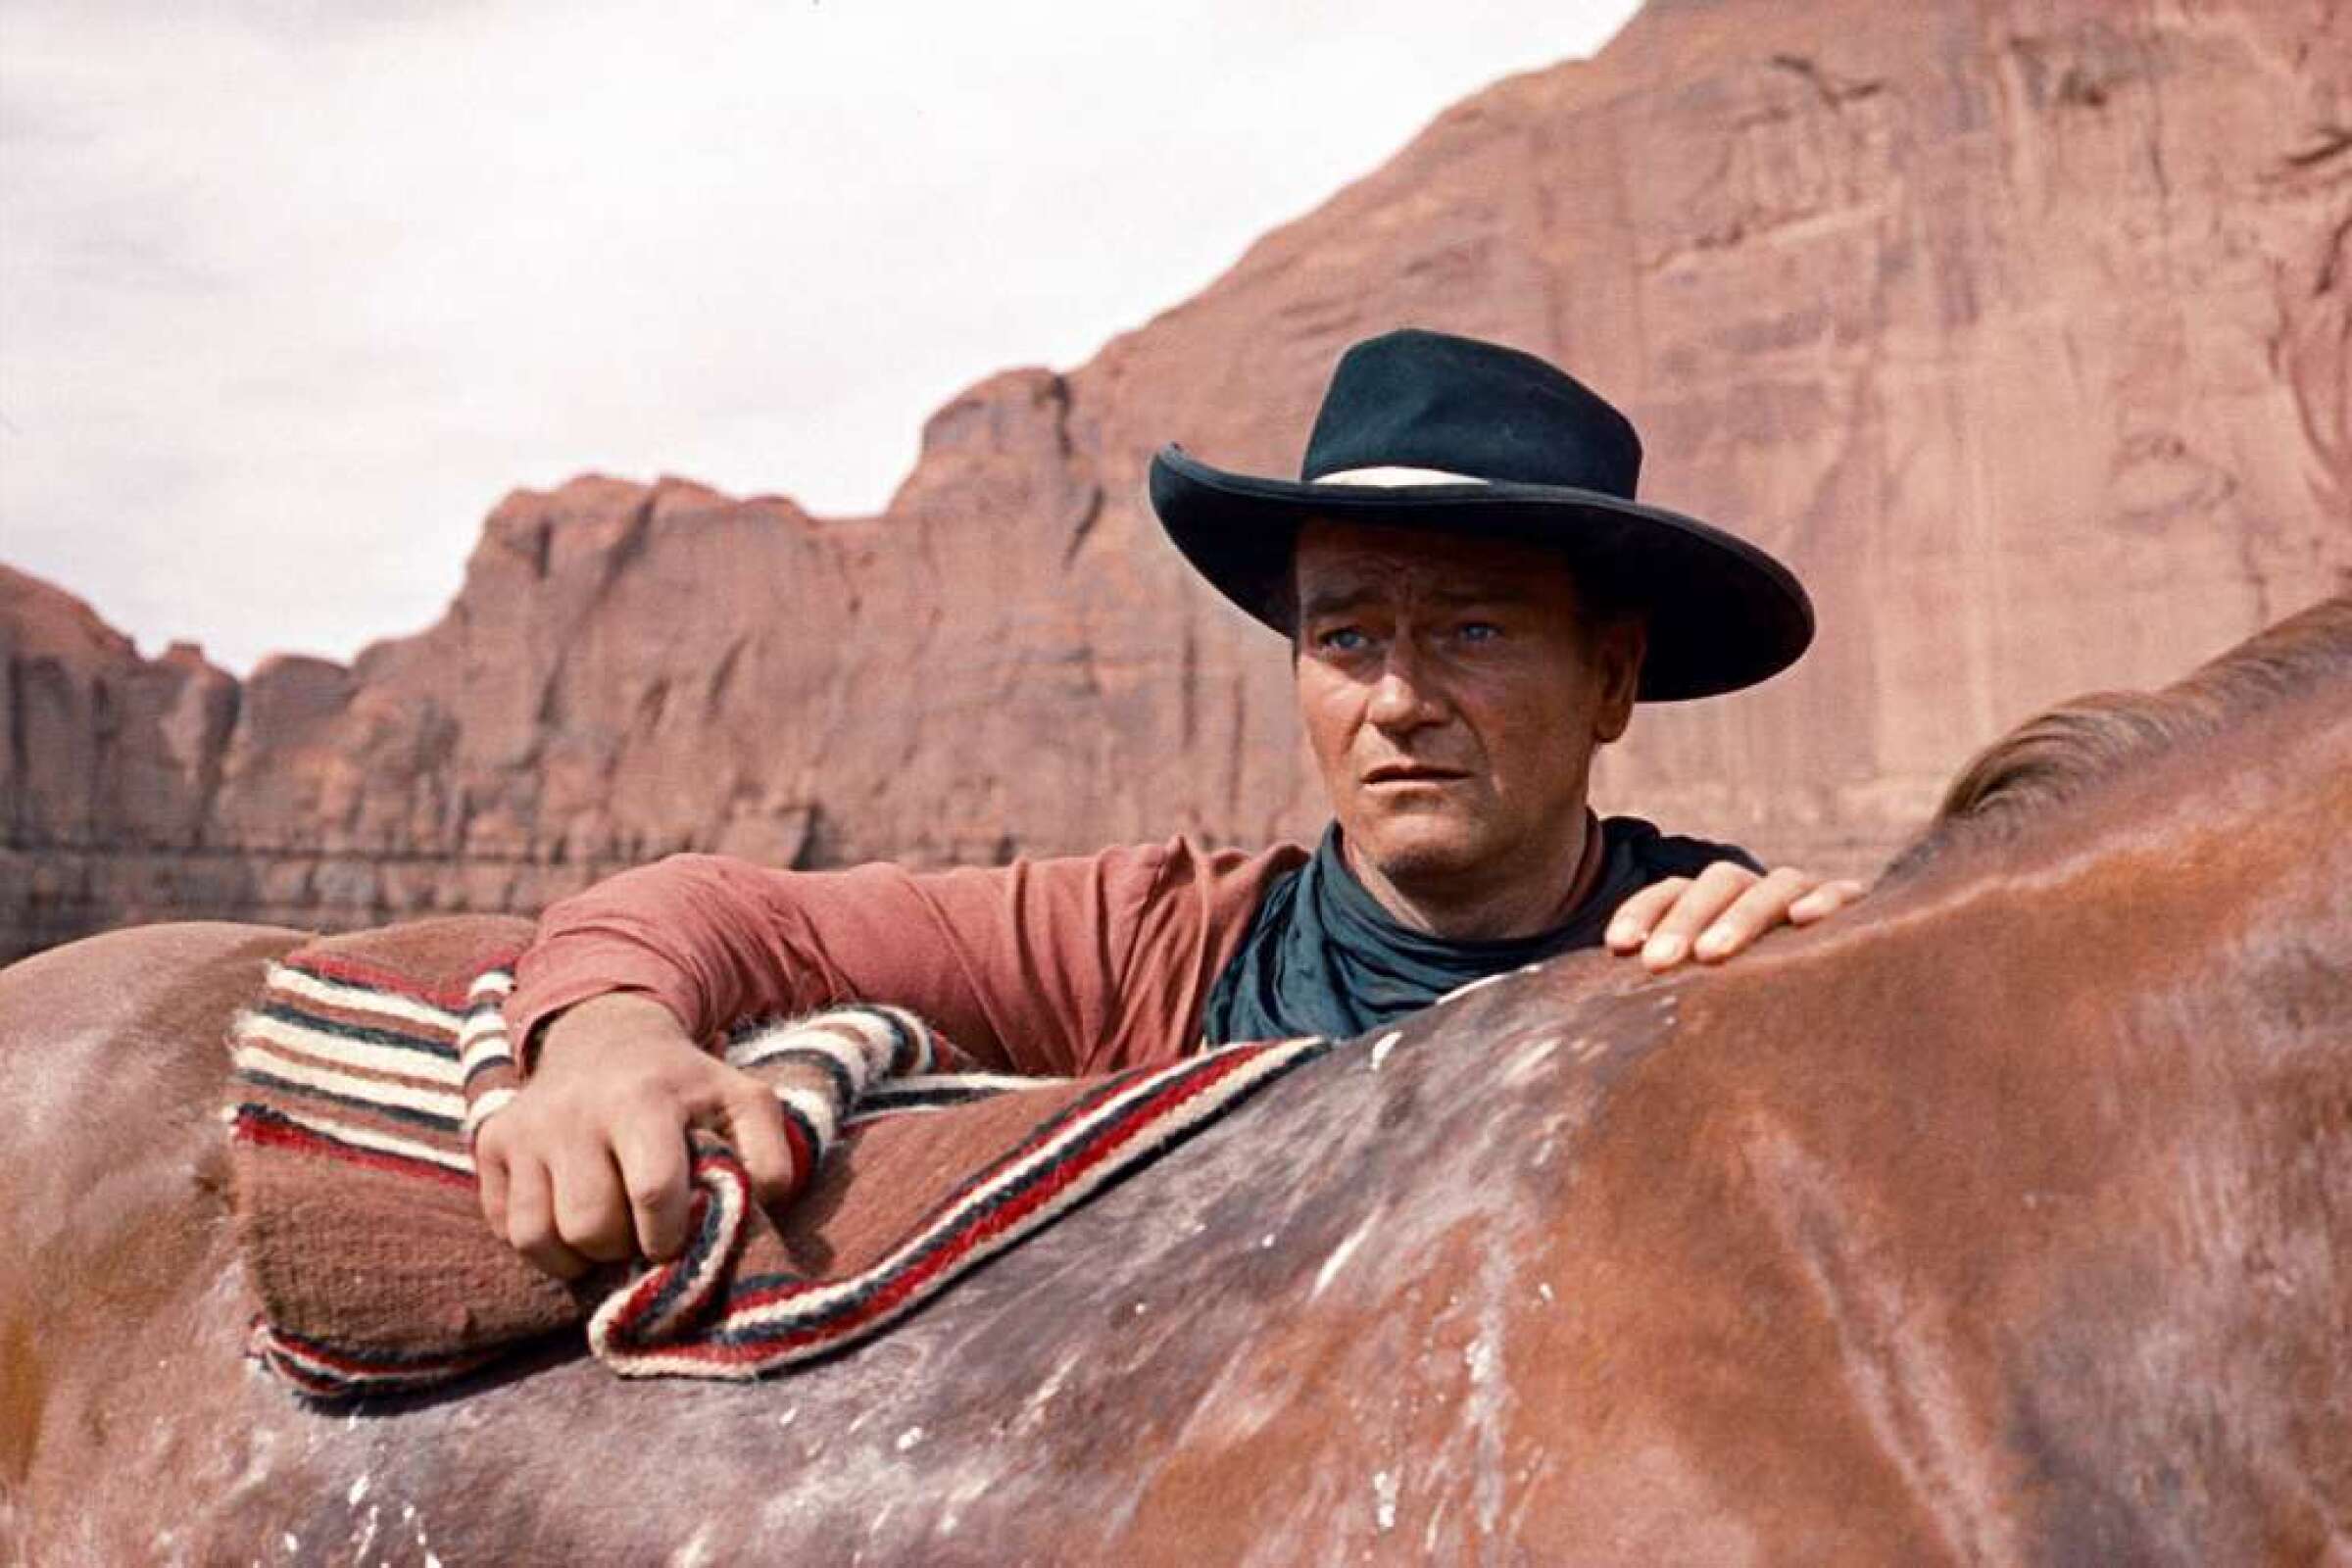 John Wayne stars in the classic western "The Searchers," directed by John Ford, on TCM